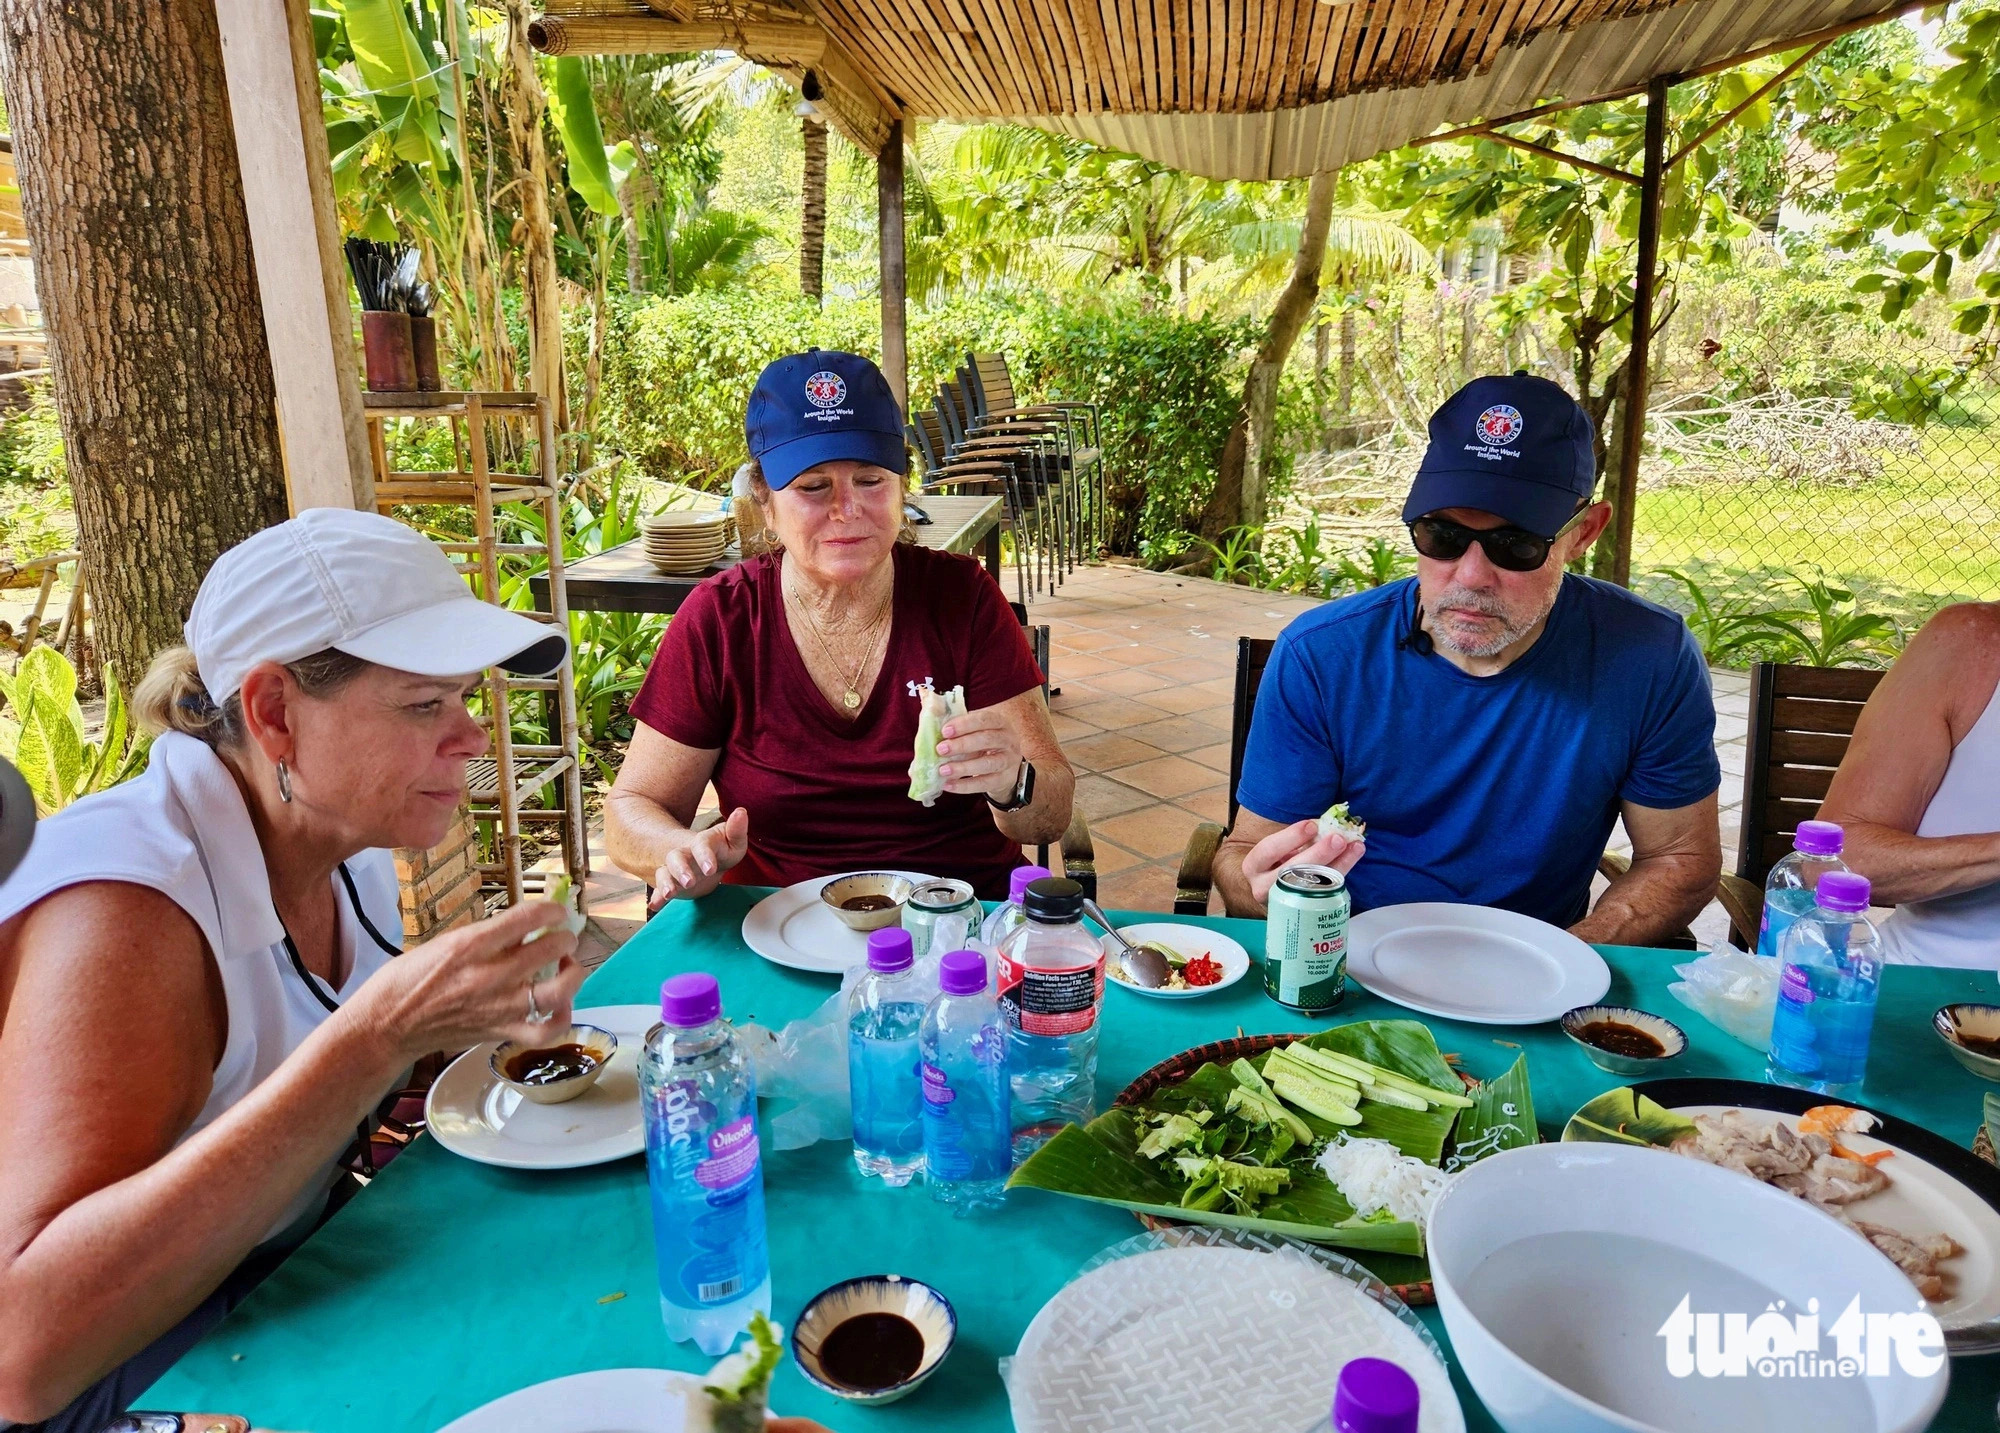 International travelers enjoy the Vietnamese dishes they made themselves at a culinary class in Nha Trang City, Khanh Hoa Province, south-central Vietnam. Photo: Minh Chien / Tuoi Tre